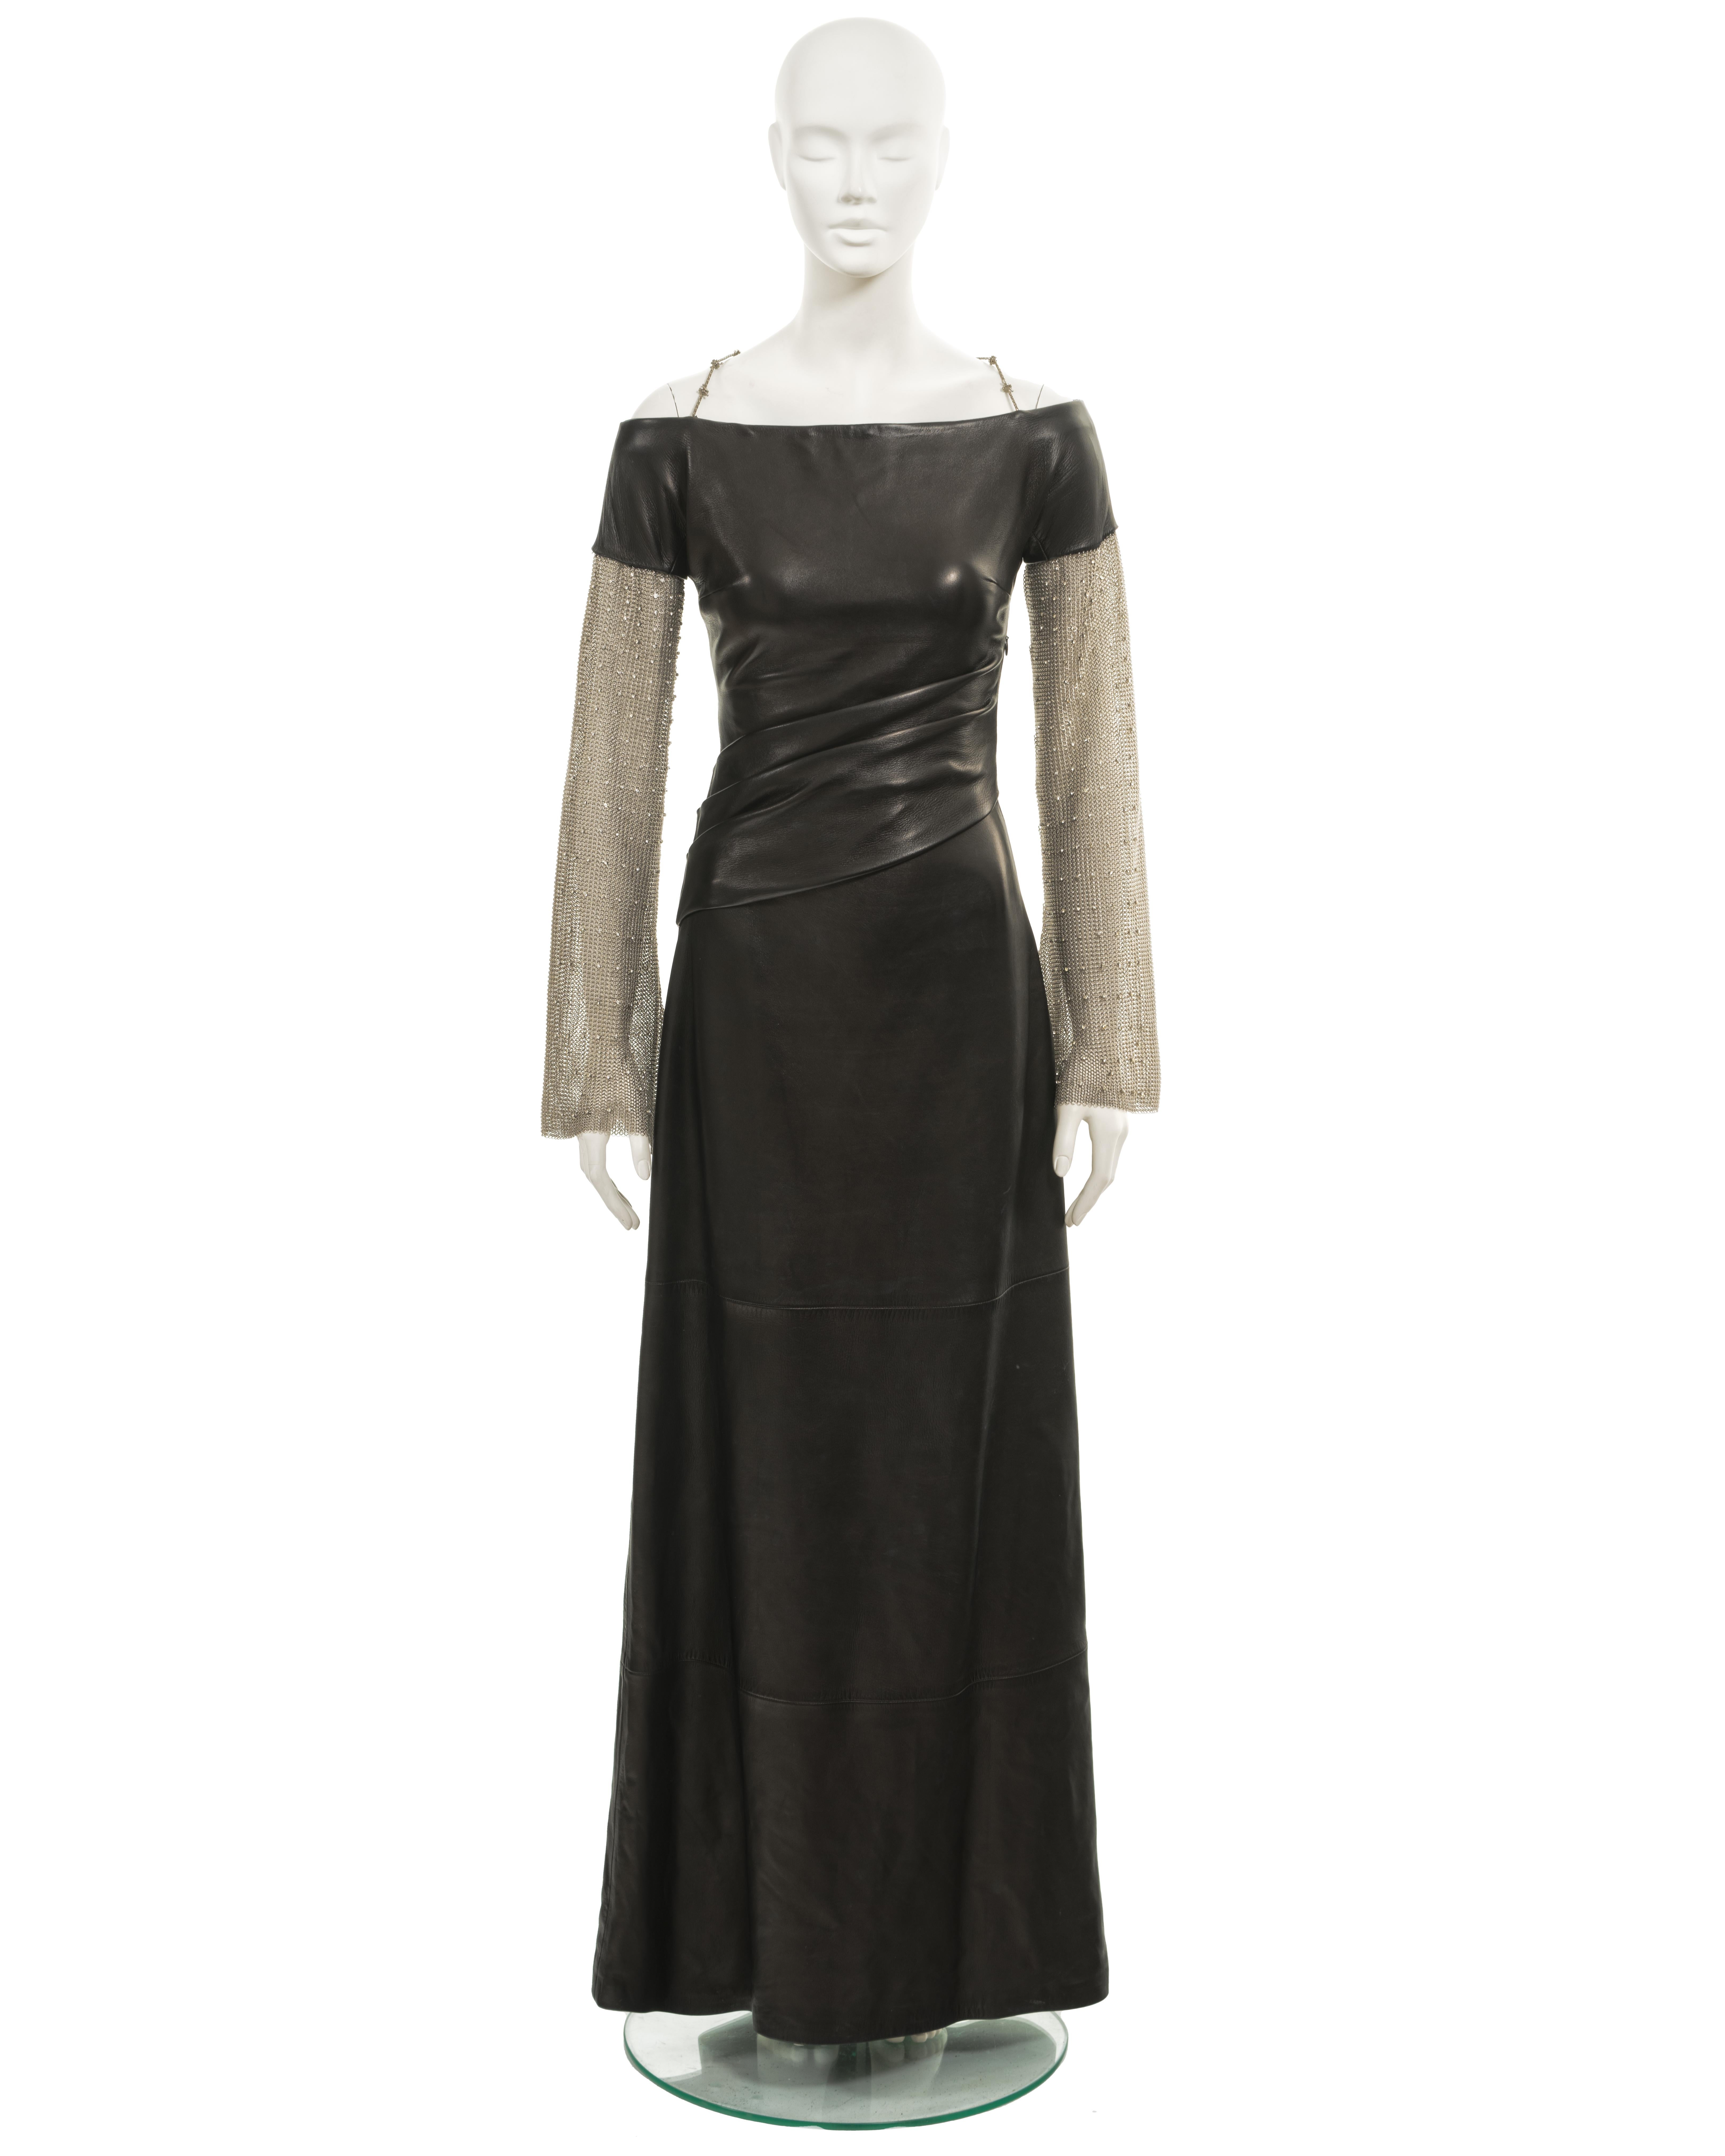 Presenting an archival Gianni Versace evening dress from the fall-winter 1998 collection. This dress is expertly crafted from black leather and exhibits refined design elements.

With a boat neck and floor-length multi-panelled skirt, the dress